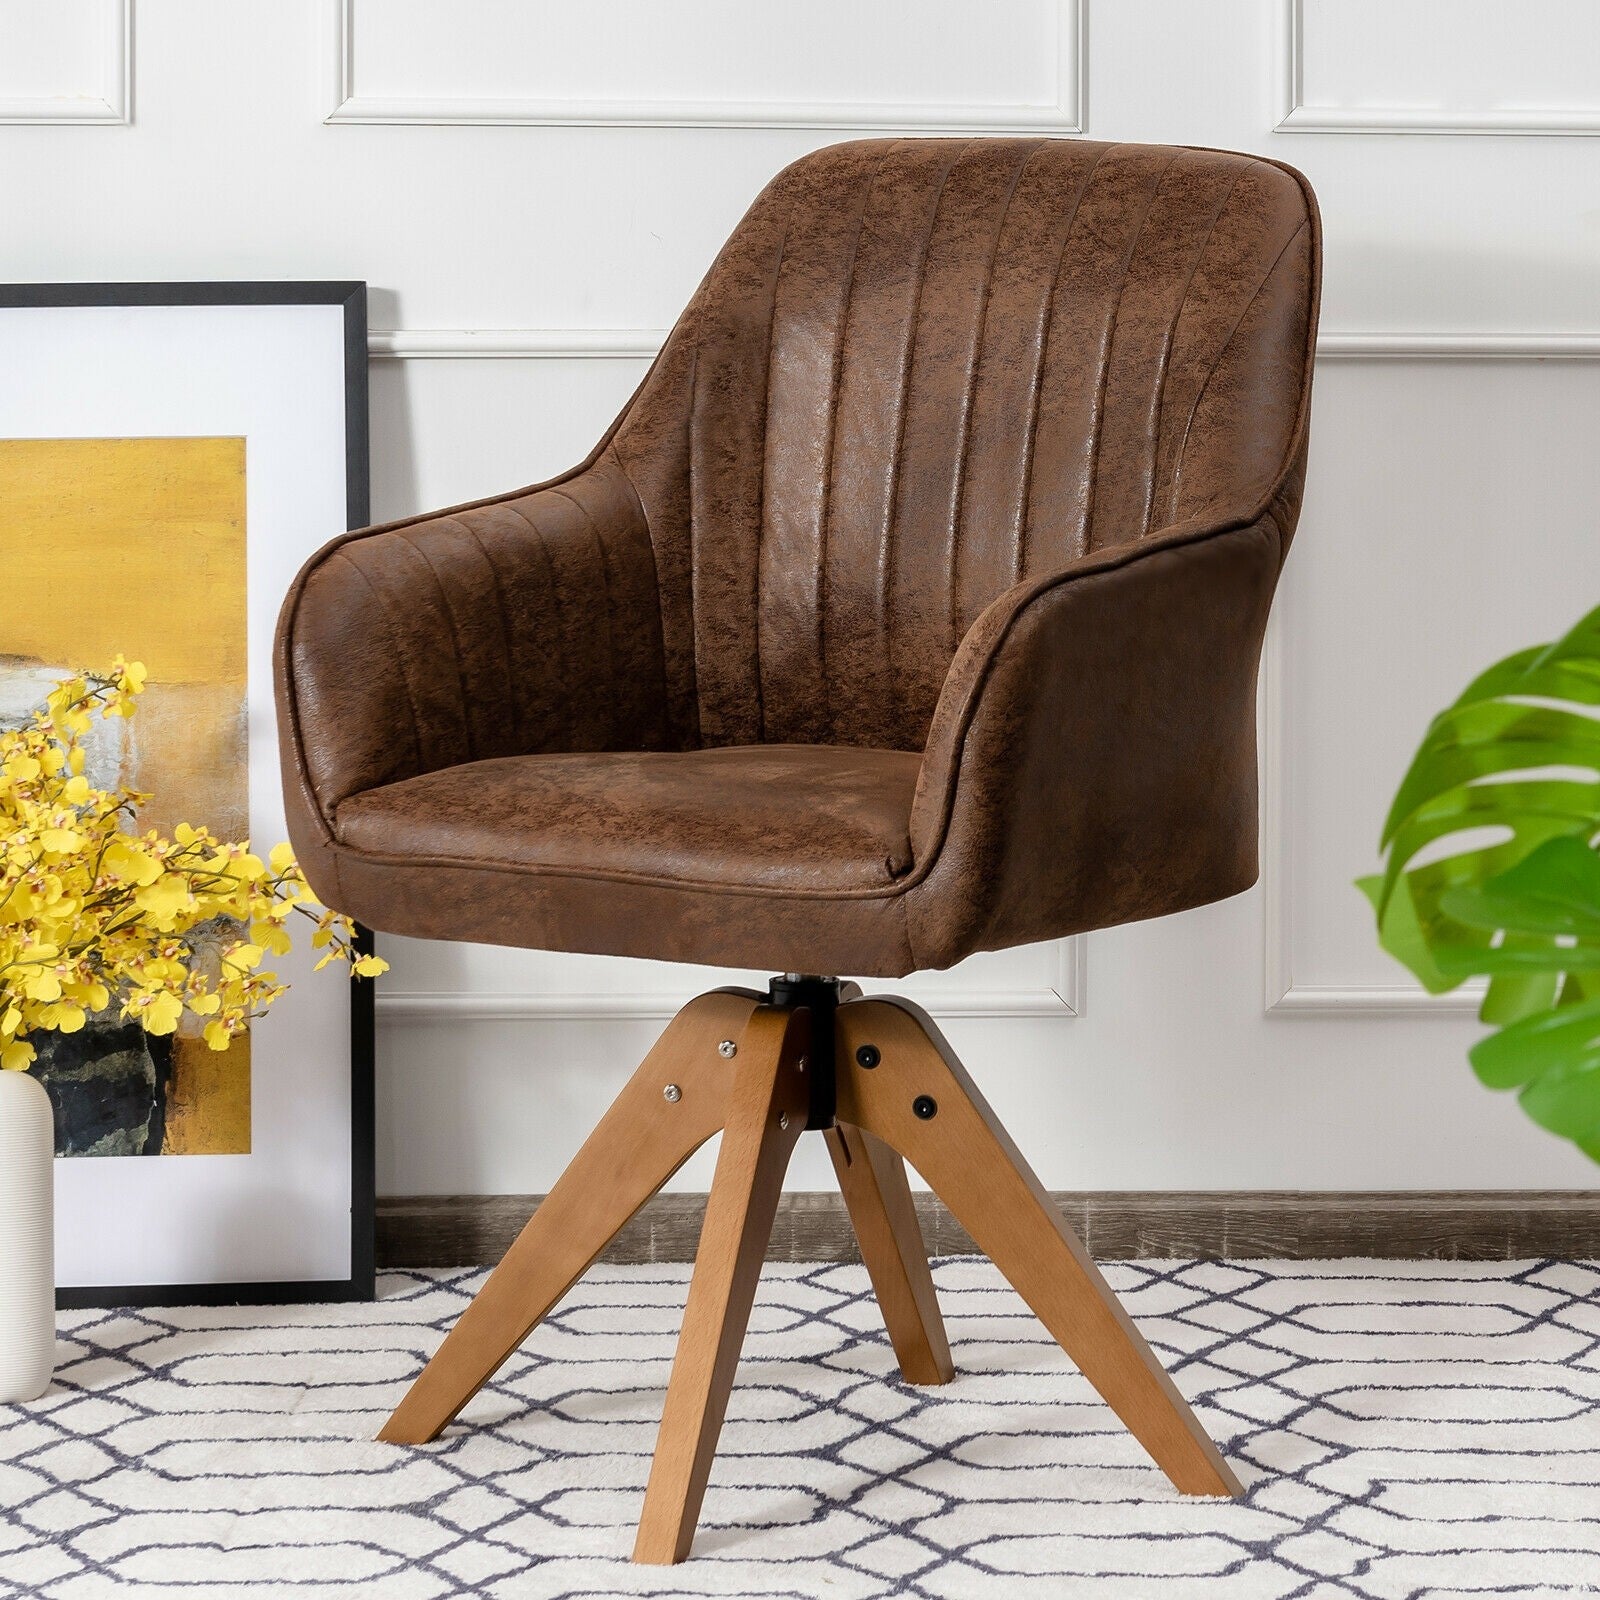 Modern Dining Armchair, No Wheels but Swivel, Solid Wood Legs, Thick Felt Foot Pads